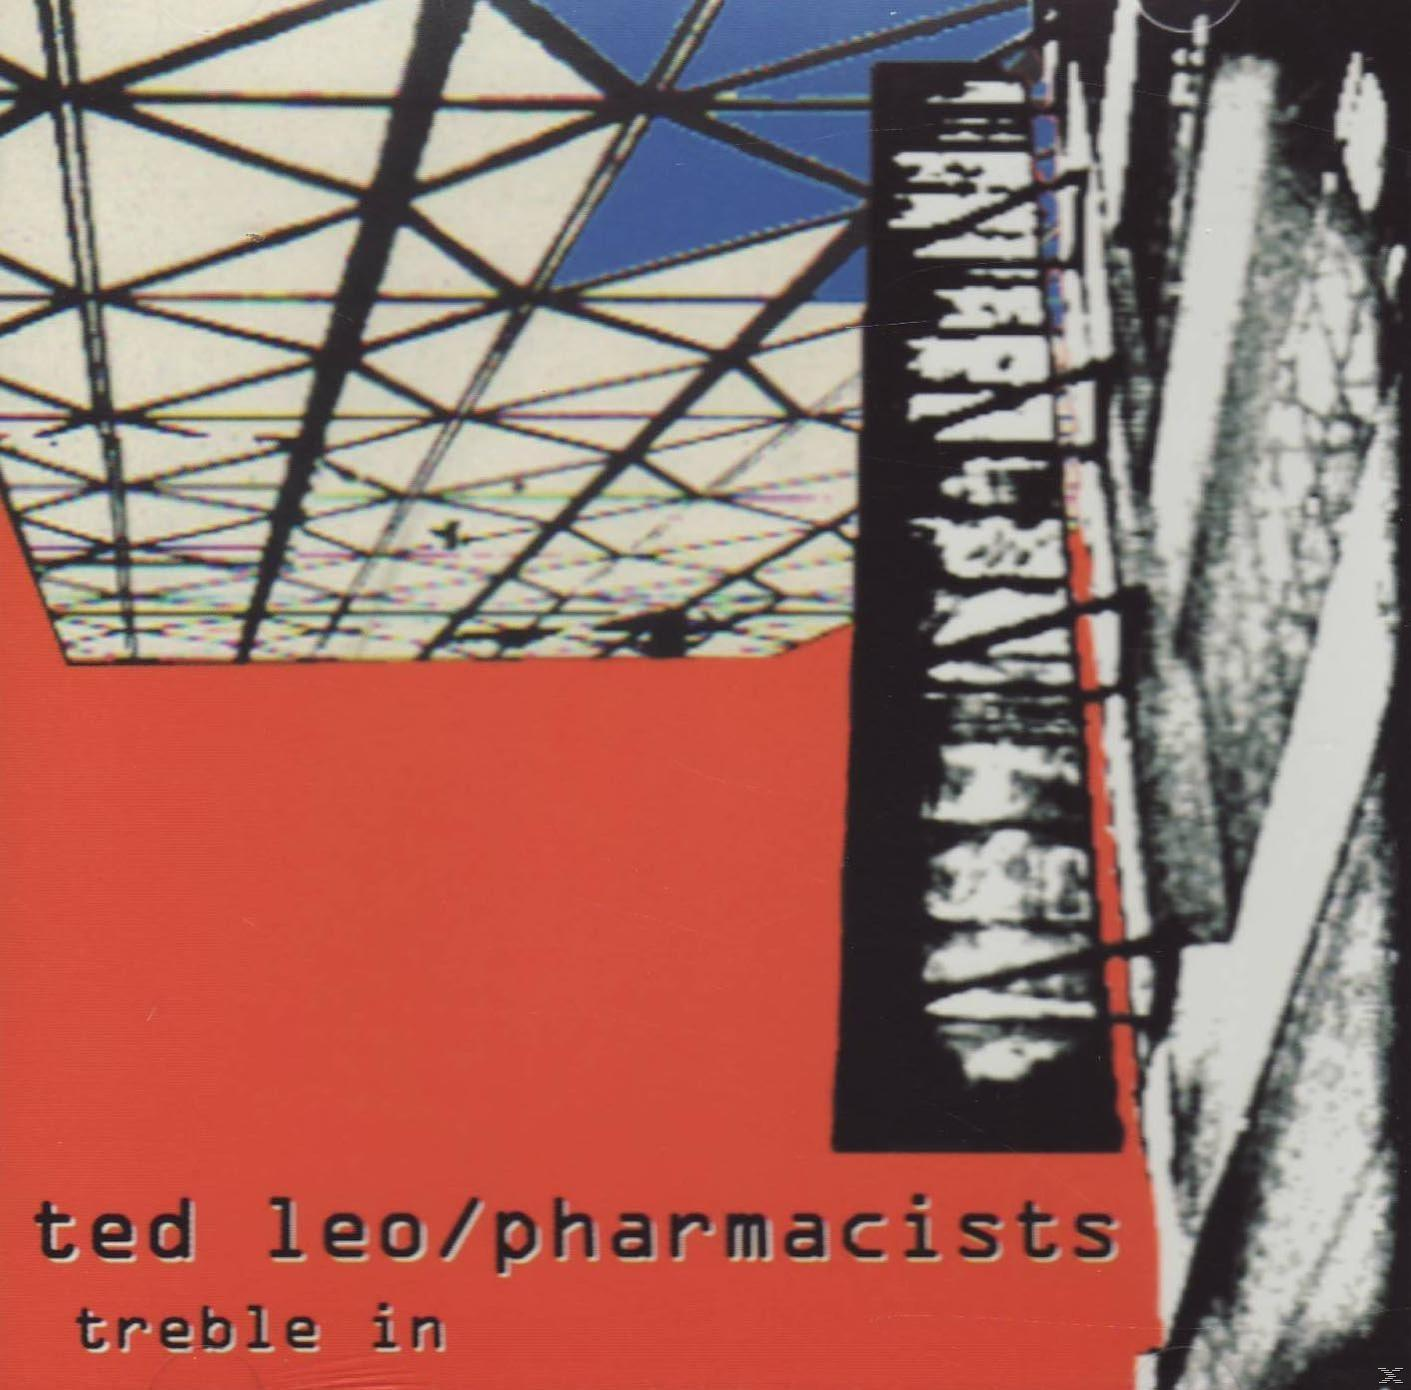 Trouble 3 In Zoll Leo, Single Pharmacists - (2-Track)) Ep Ted The (CD - Treble